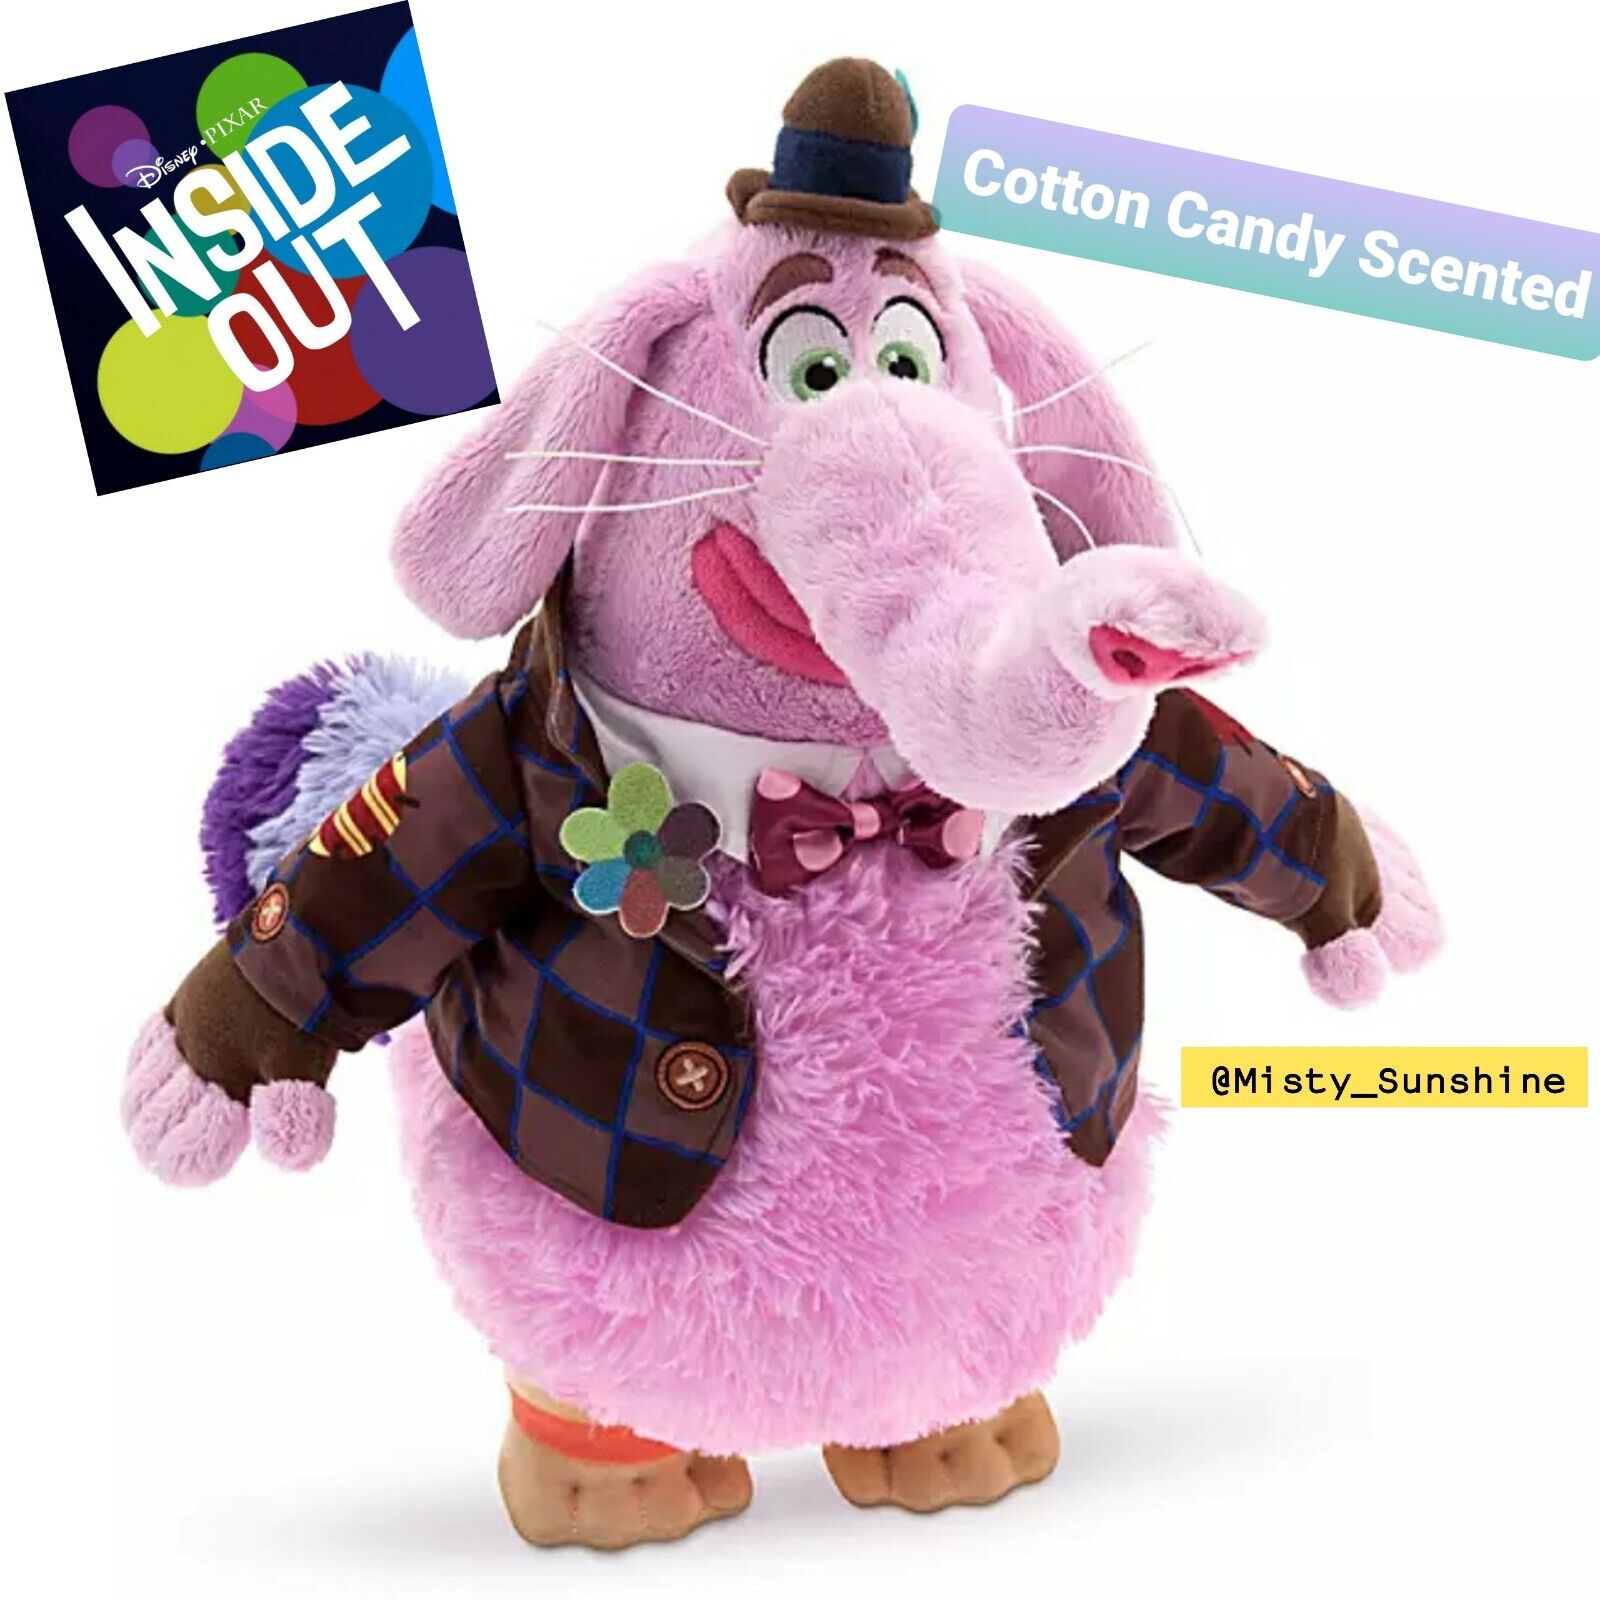 Disney Pixar Inside Out Bing Bong Cotton Candy Scented 16\